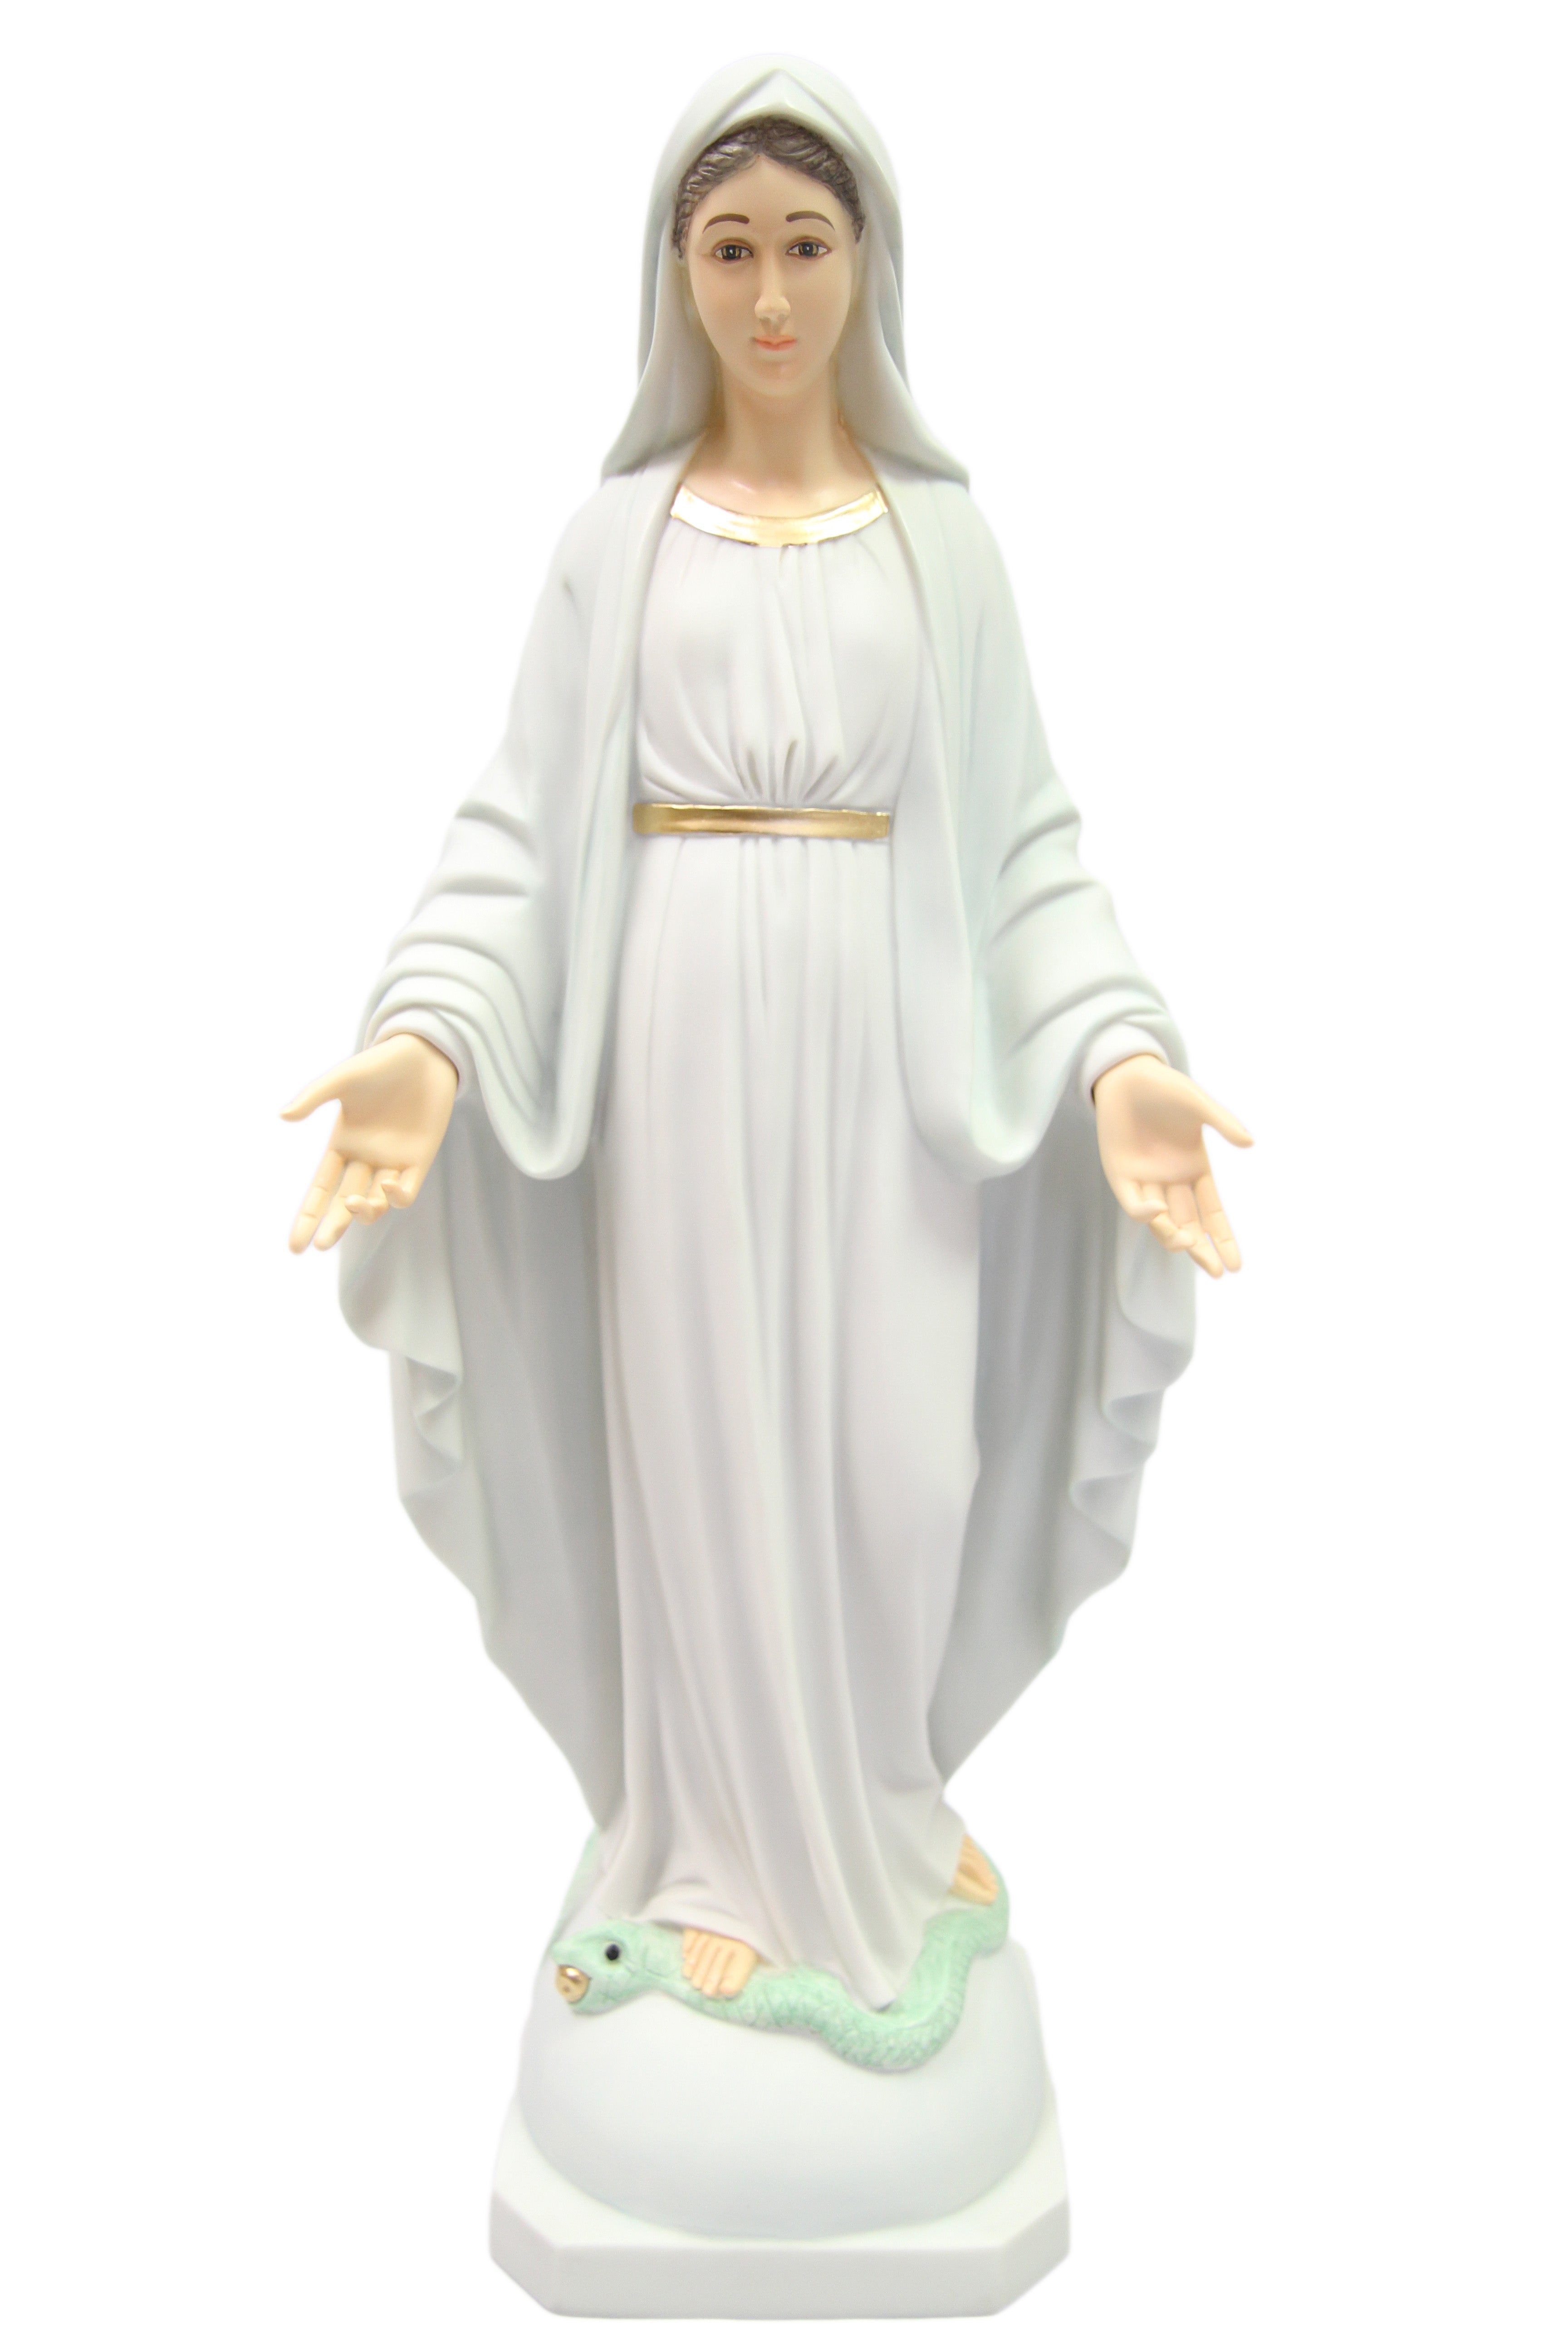 23.5 Inch Our Lady of Grace Virgin Mary Catholic Statue Sculpture Vittoria Collection Made in Italy